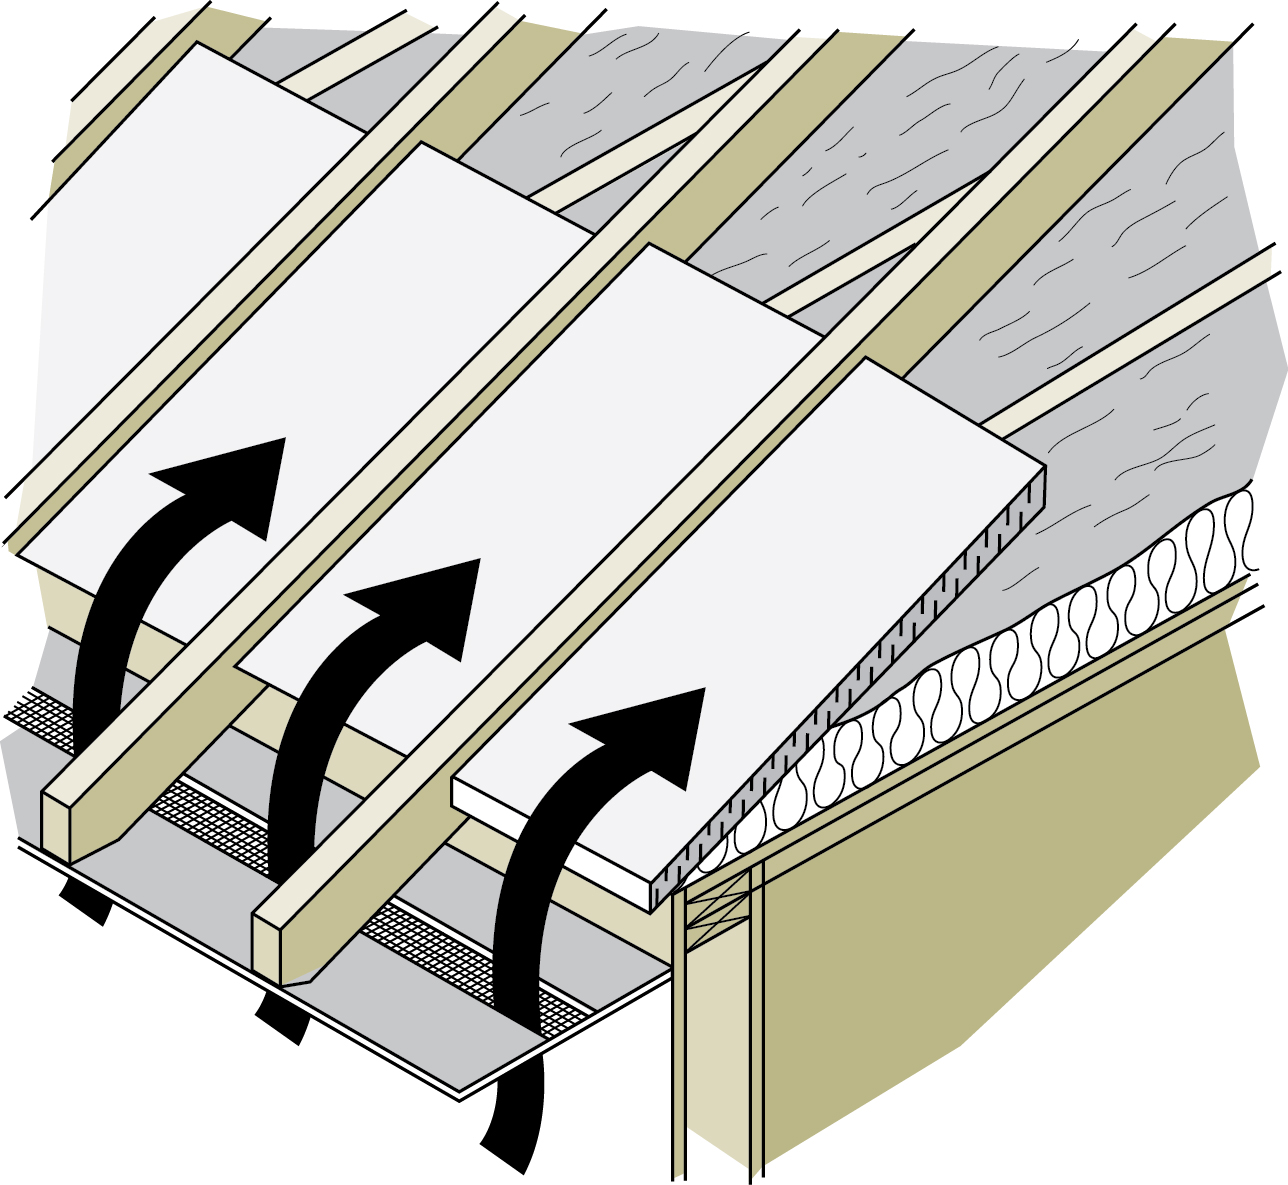 Figure 5-11 Baffles can be used to maintain airflow through the soffit vents